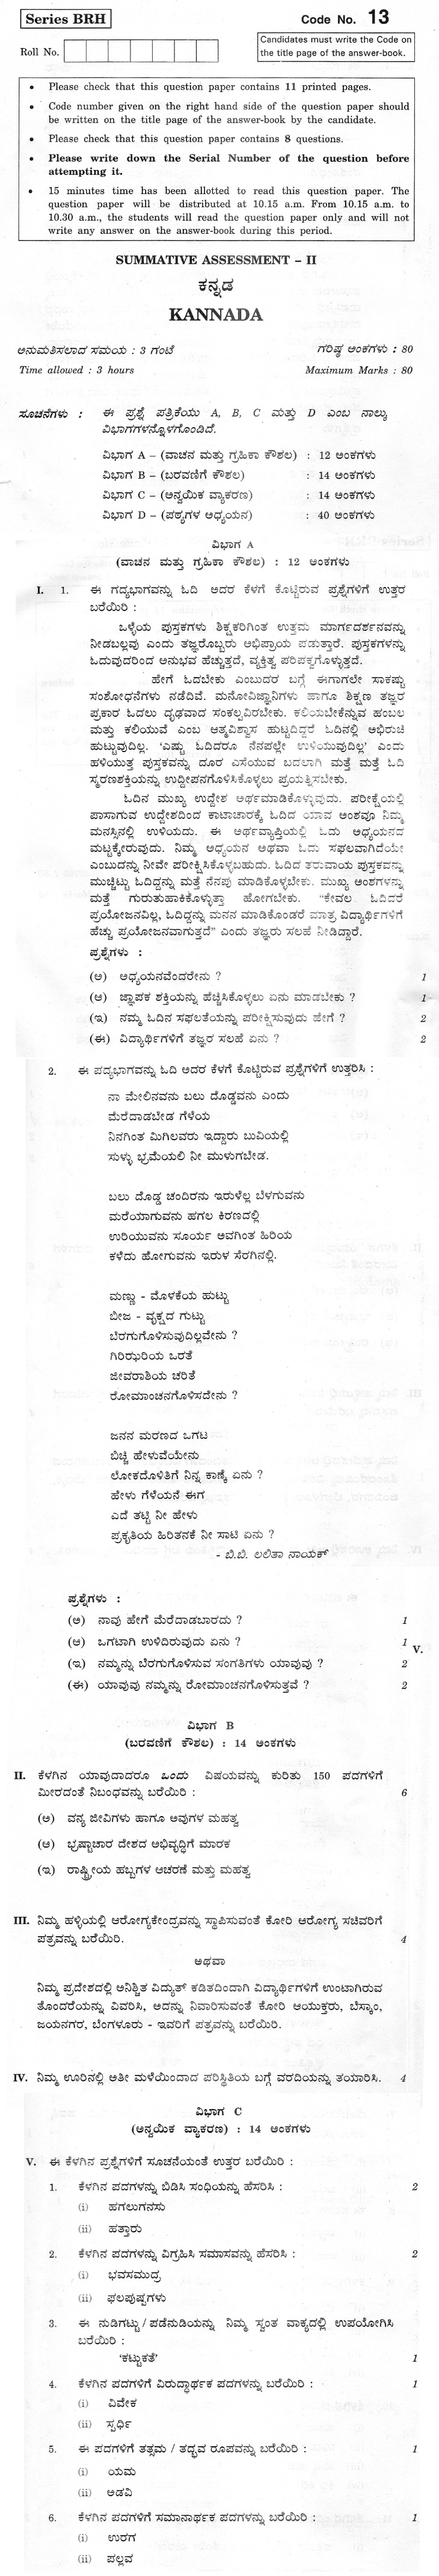 CBSE Class X Previous Year Question Papers 2012 Kannada